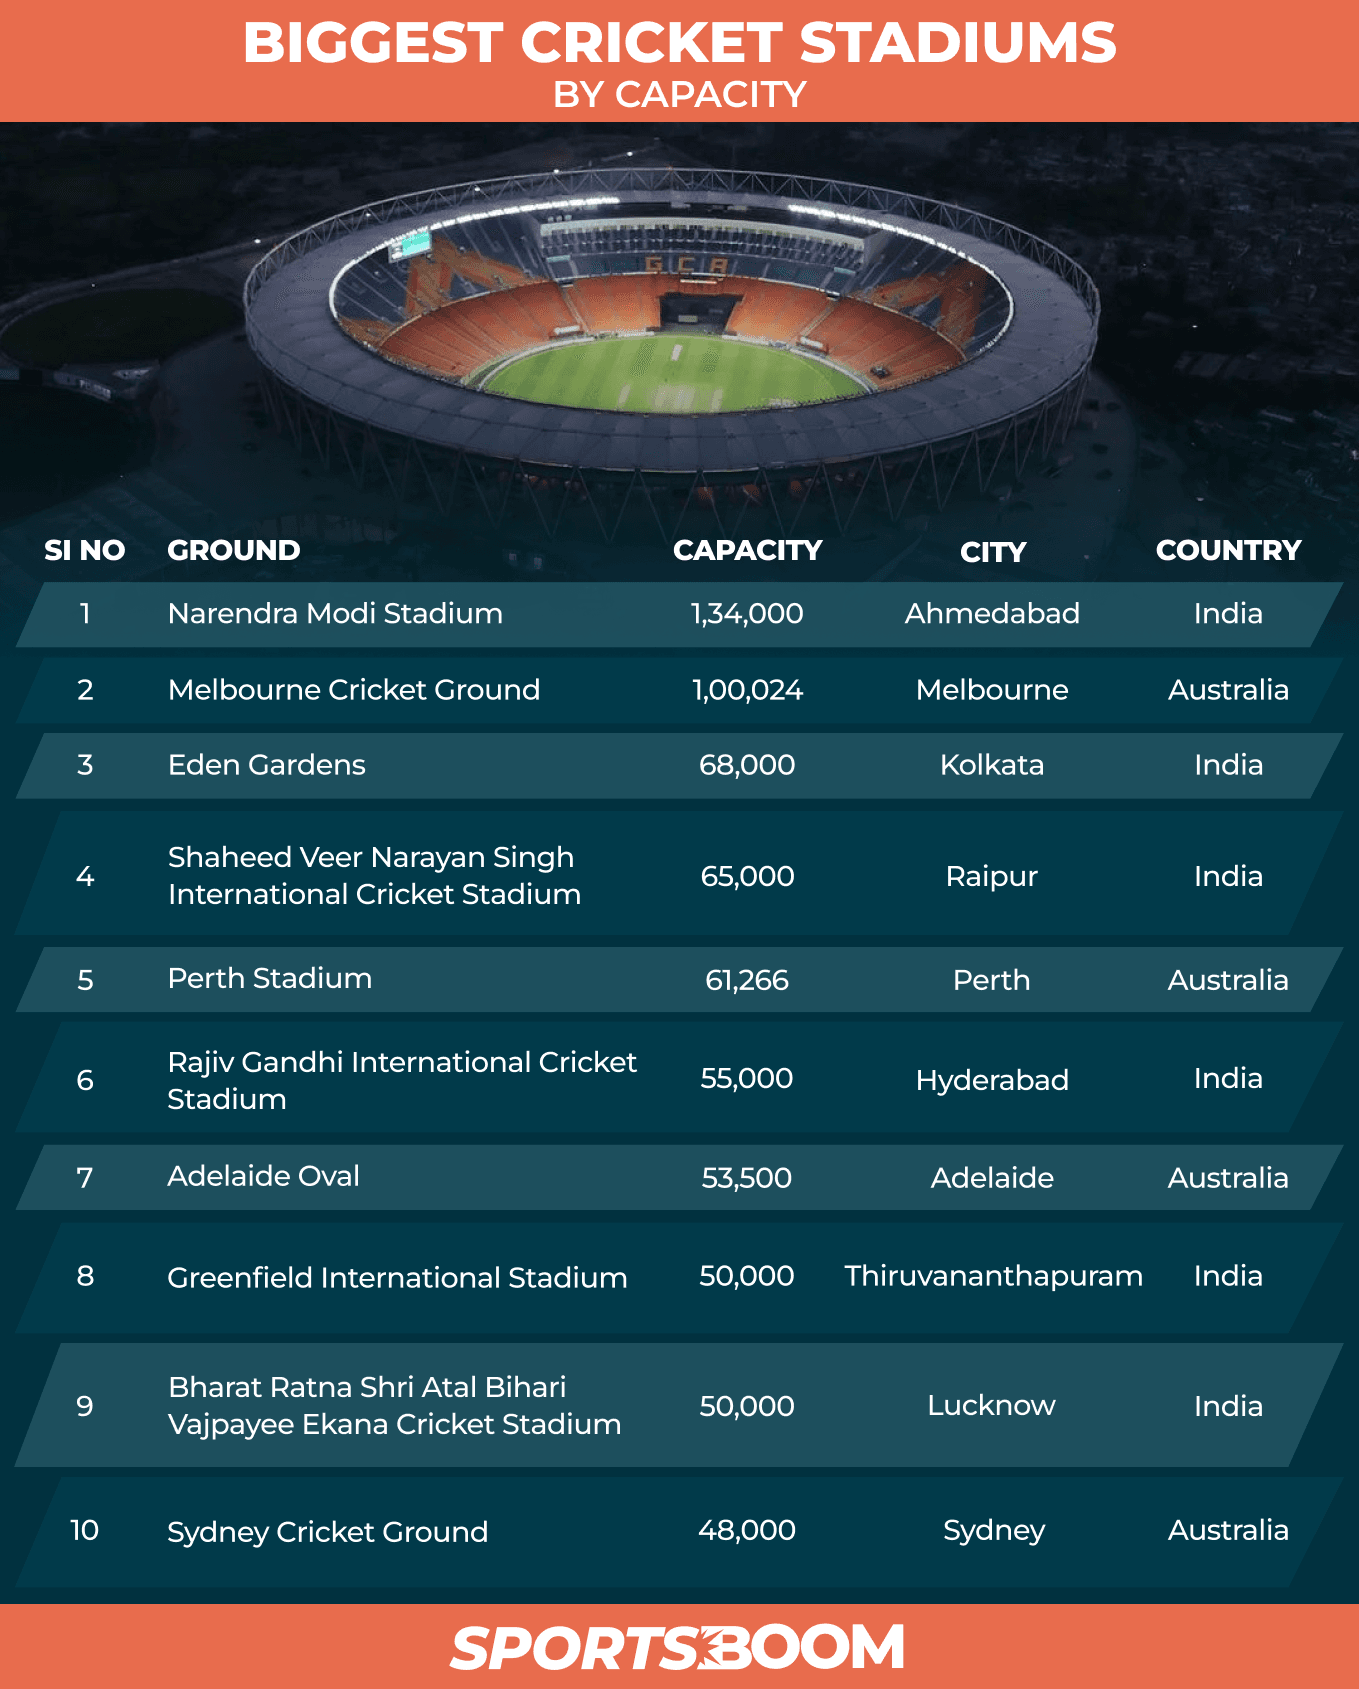 BIGGEST CRICKET STADIUMS BY CAPACITY.png